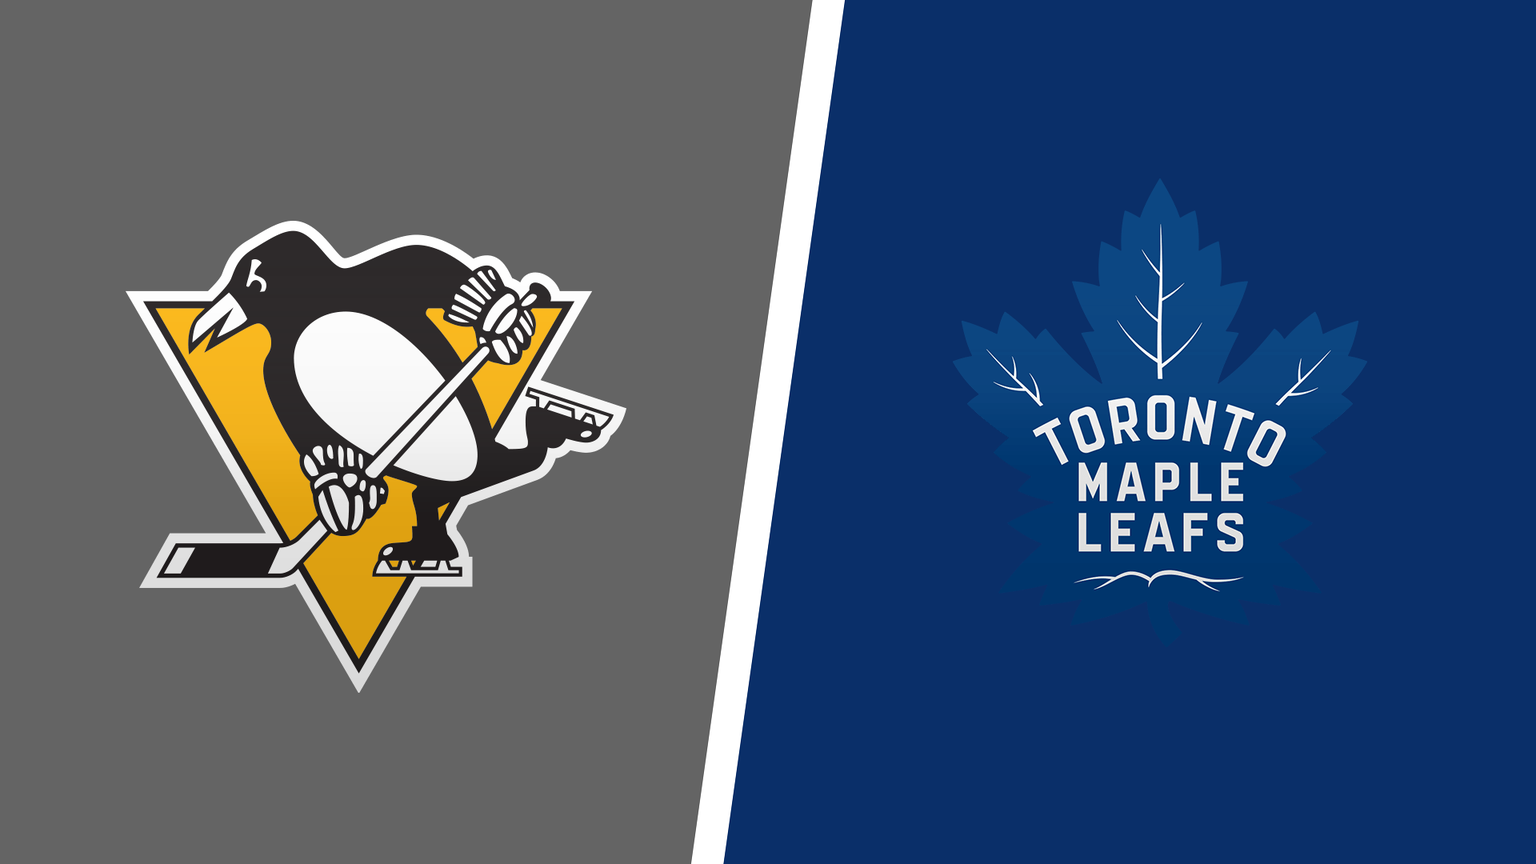 How to Watch Toronto Maple Leafs vs. Pittsburgh Penguins Game Live